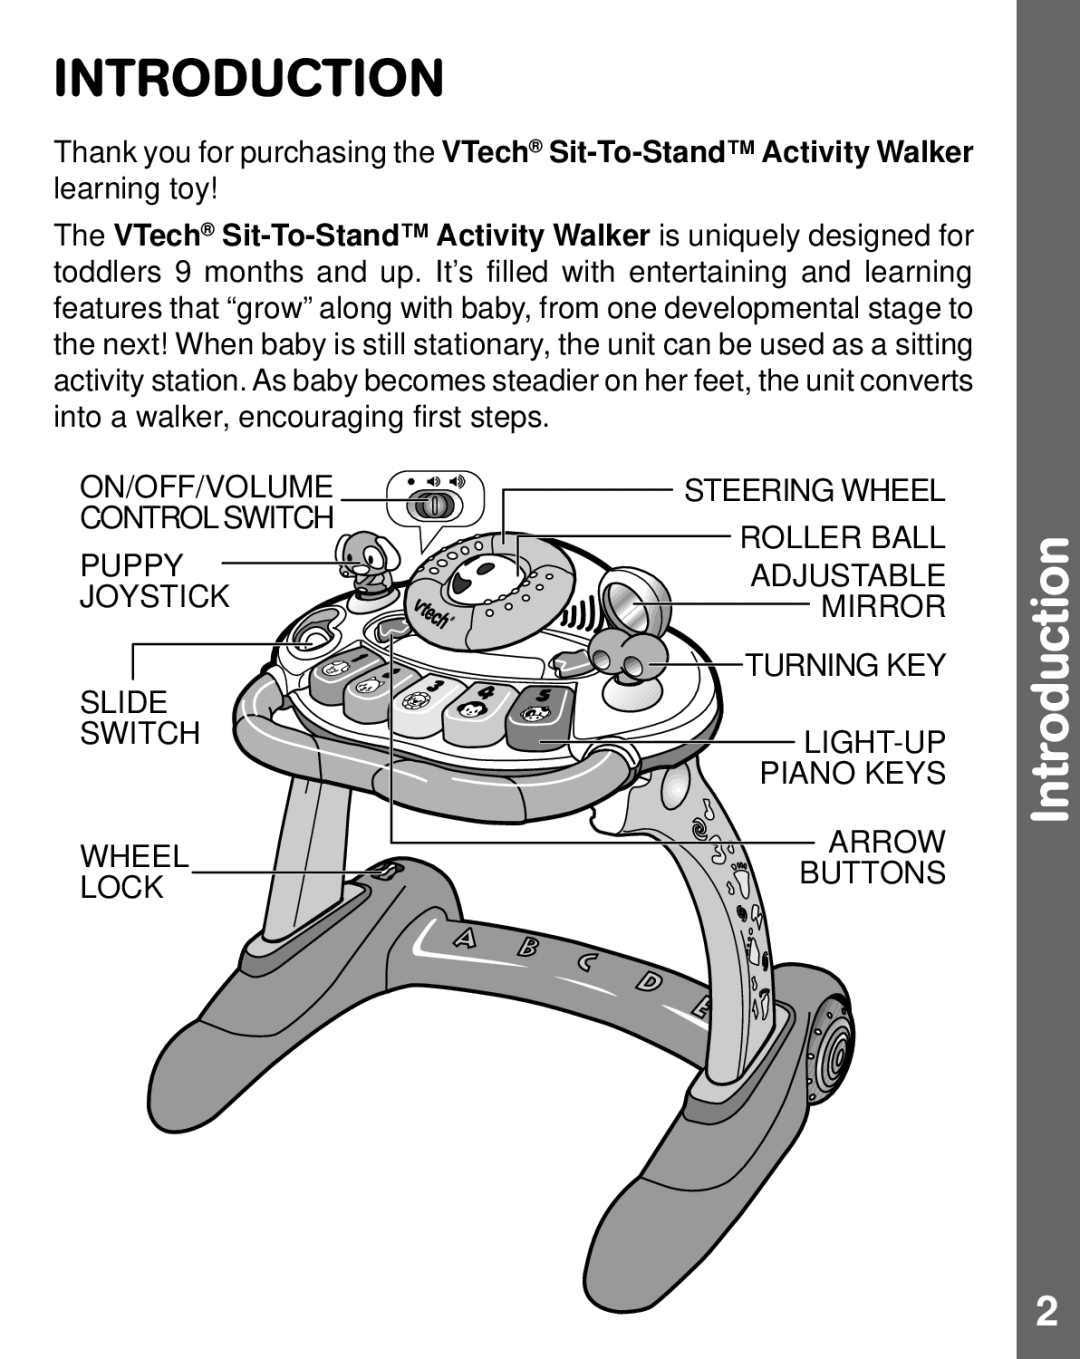 VTech sit-to-stand user manual Introduction 